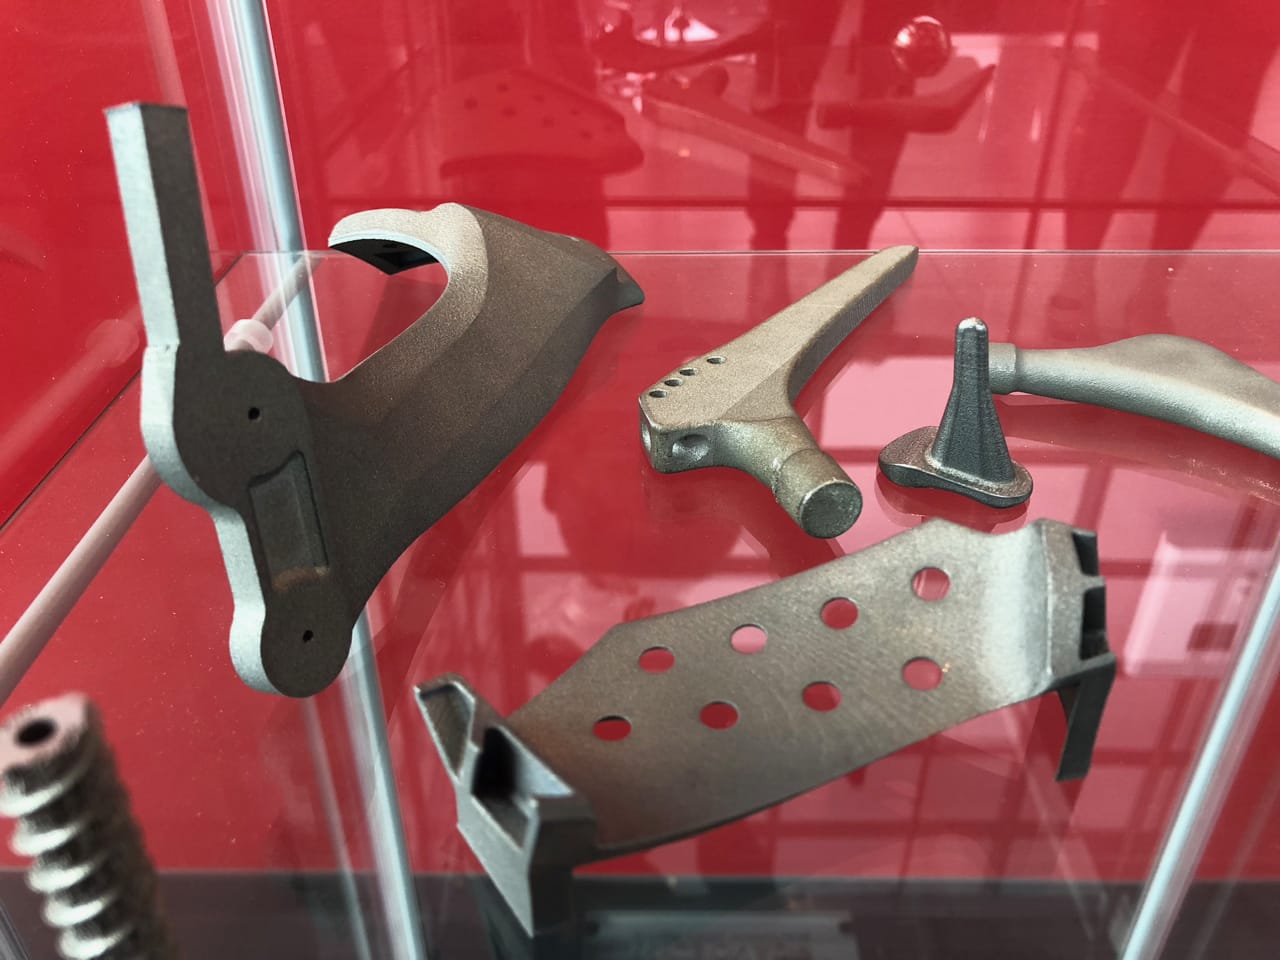  Personalized 3D printed metal parts intended for use in a military exoskeleton [Source: Fabbaloo] 